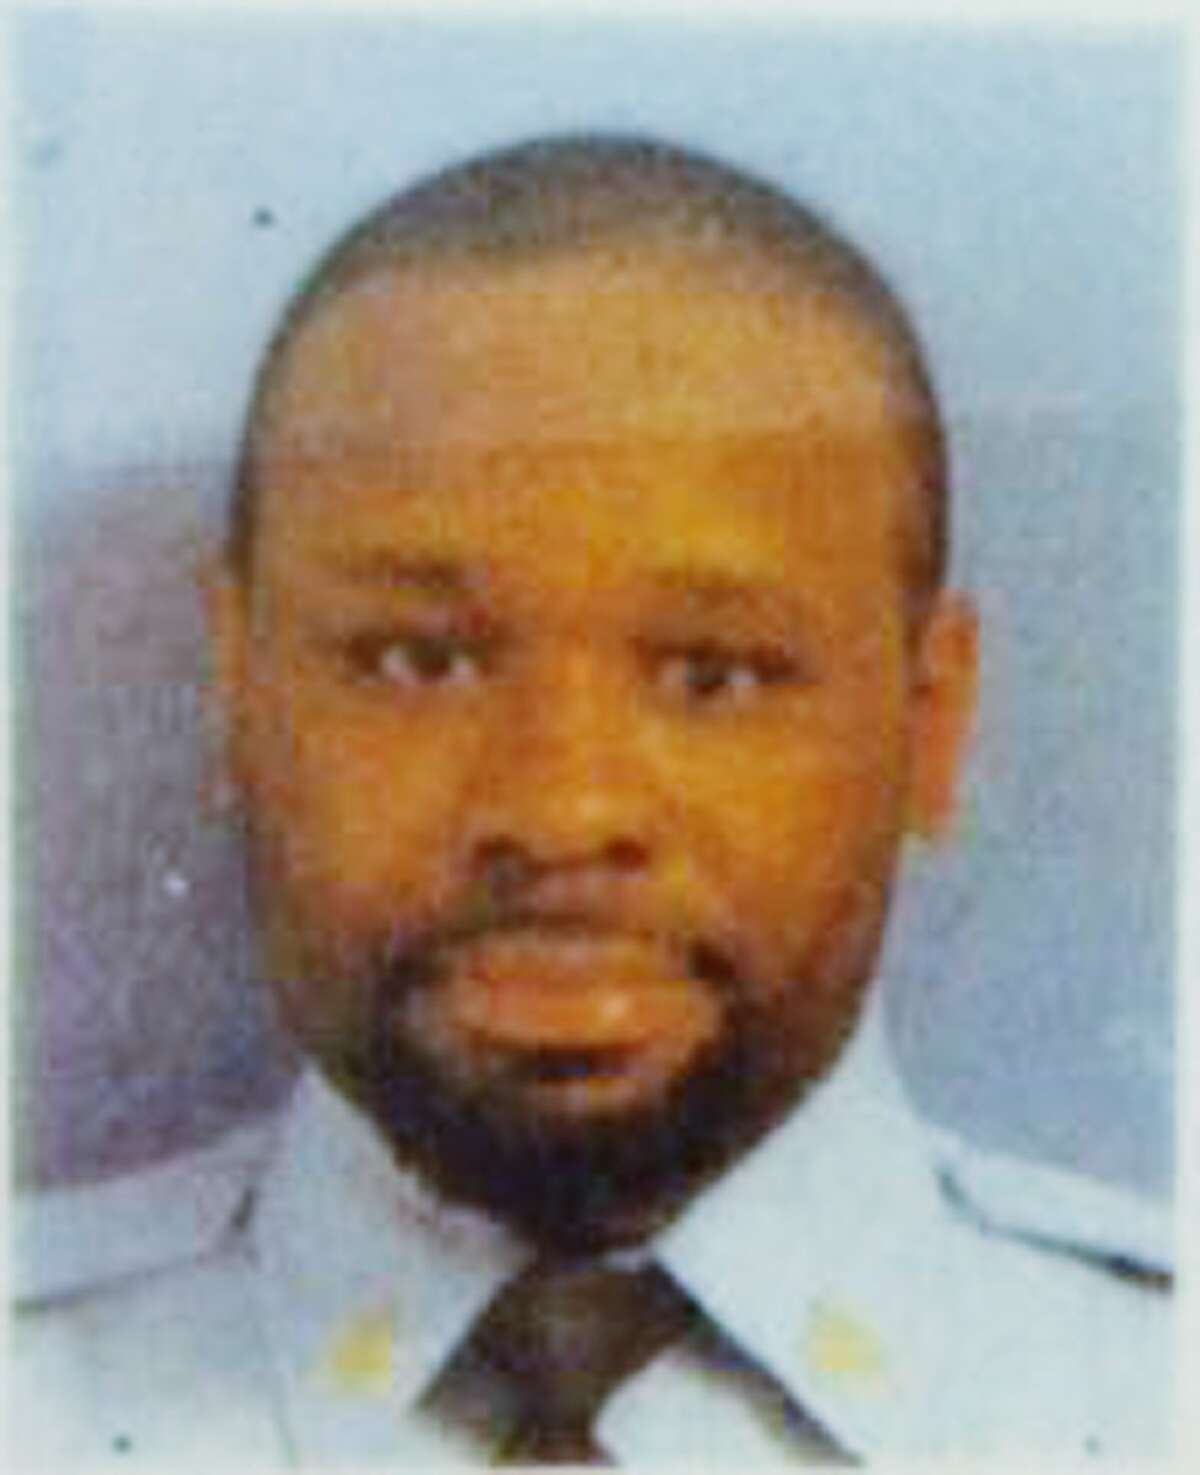 This undated photo provided by the Delaware Department of Correction shows Sgt. Steven Floyd. Floyd died in a hostage standoff at the James T. Vaughn Correctional Center in Smyrna, Delaware. Officers found him unresponsive when they breached the building where inmates had held hostages on Thursday, Feb. 2, 2017. (Delaware Department of Correction via AP)